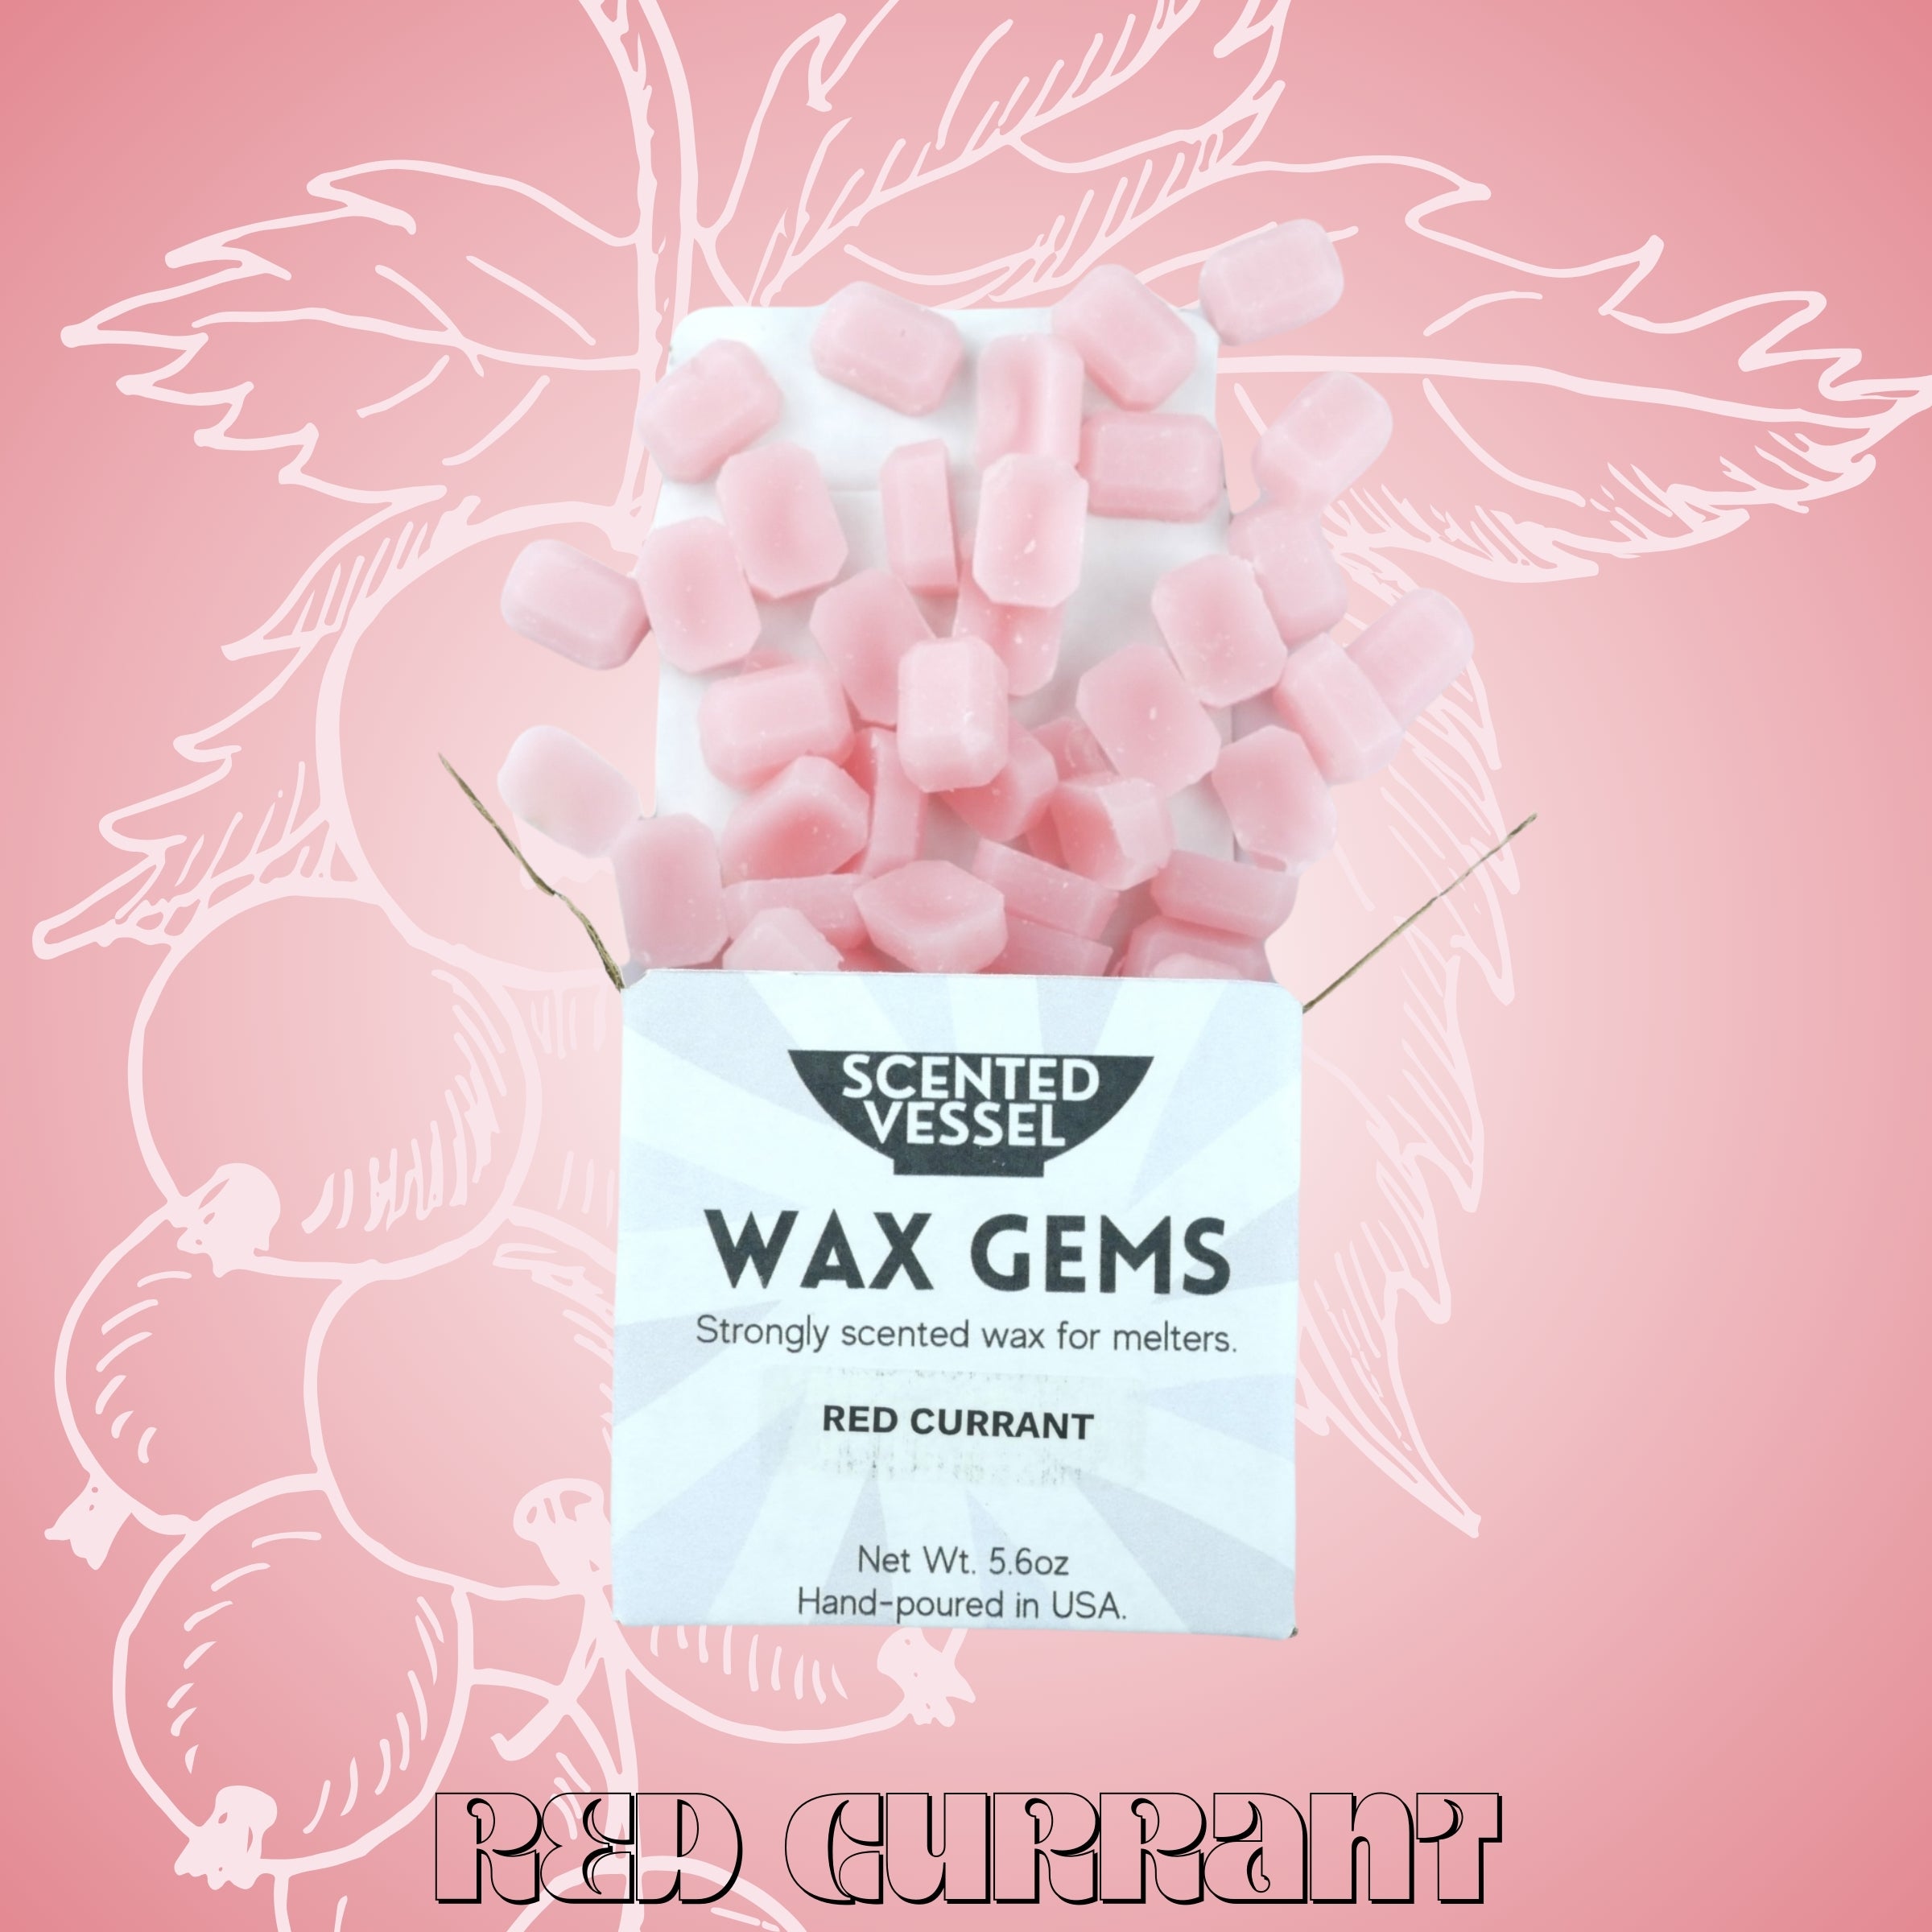 Red Currant 5.6oz Wax Gems by Scented Vessel